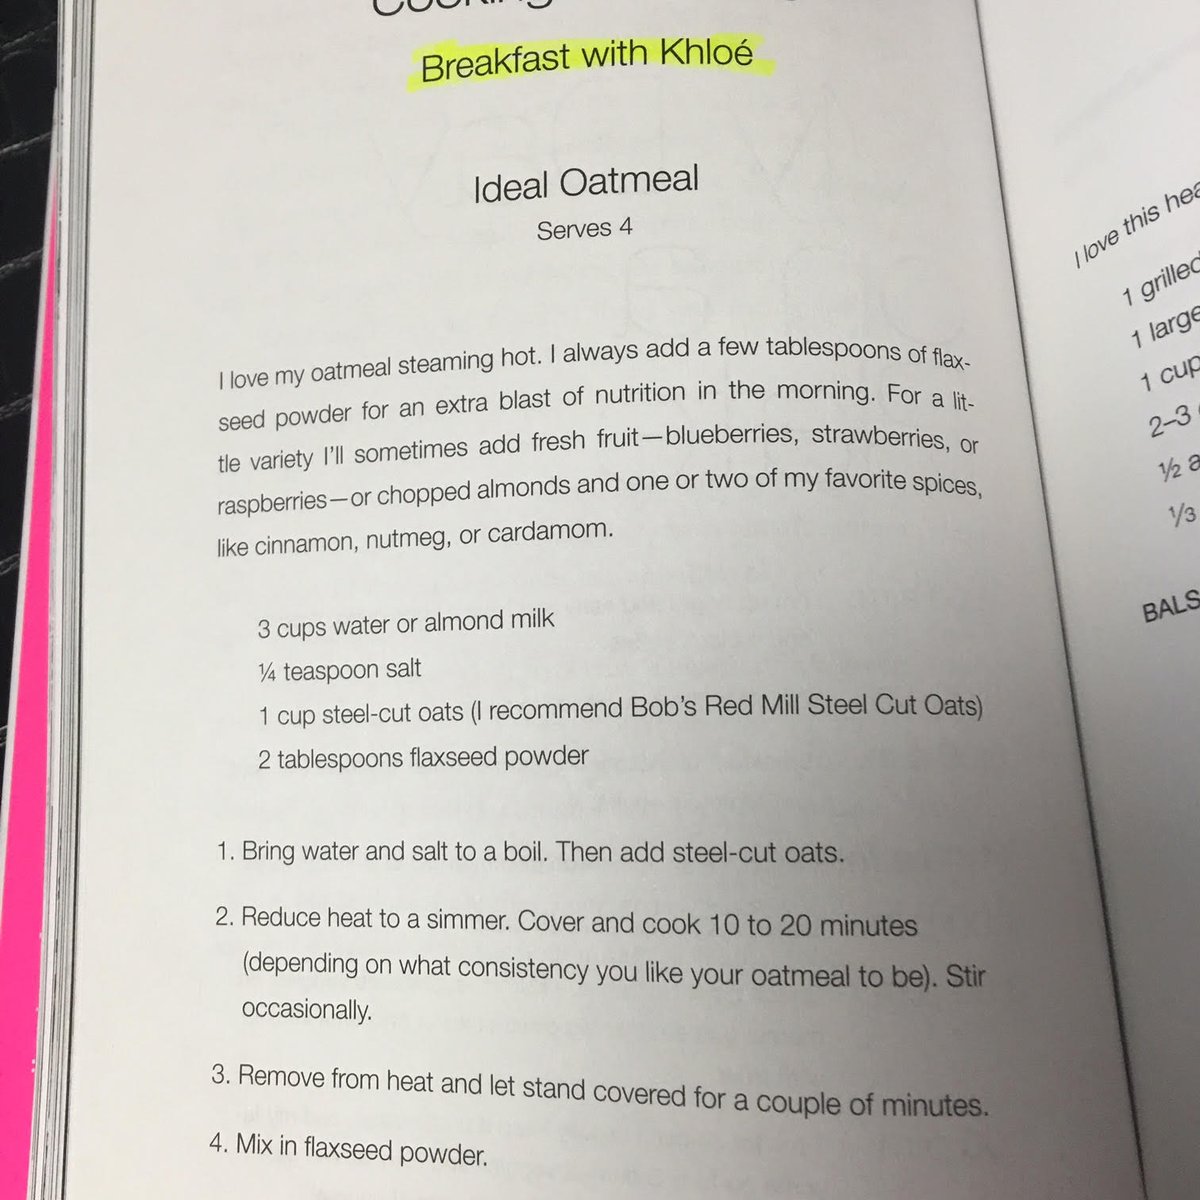 Everyone's asking me about breakfast lol!! I have tons of recipes in #stronglooksbetternaked but this is my go to... https://t.co/PwniLqiIPF